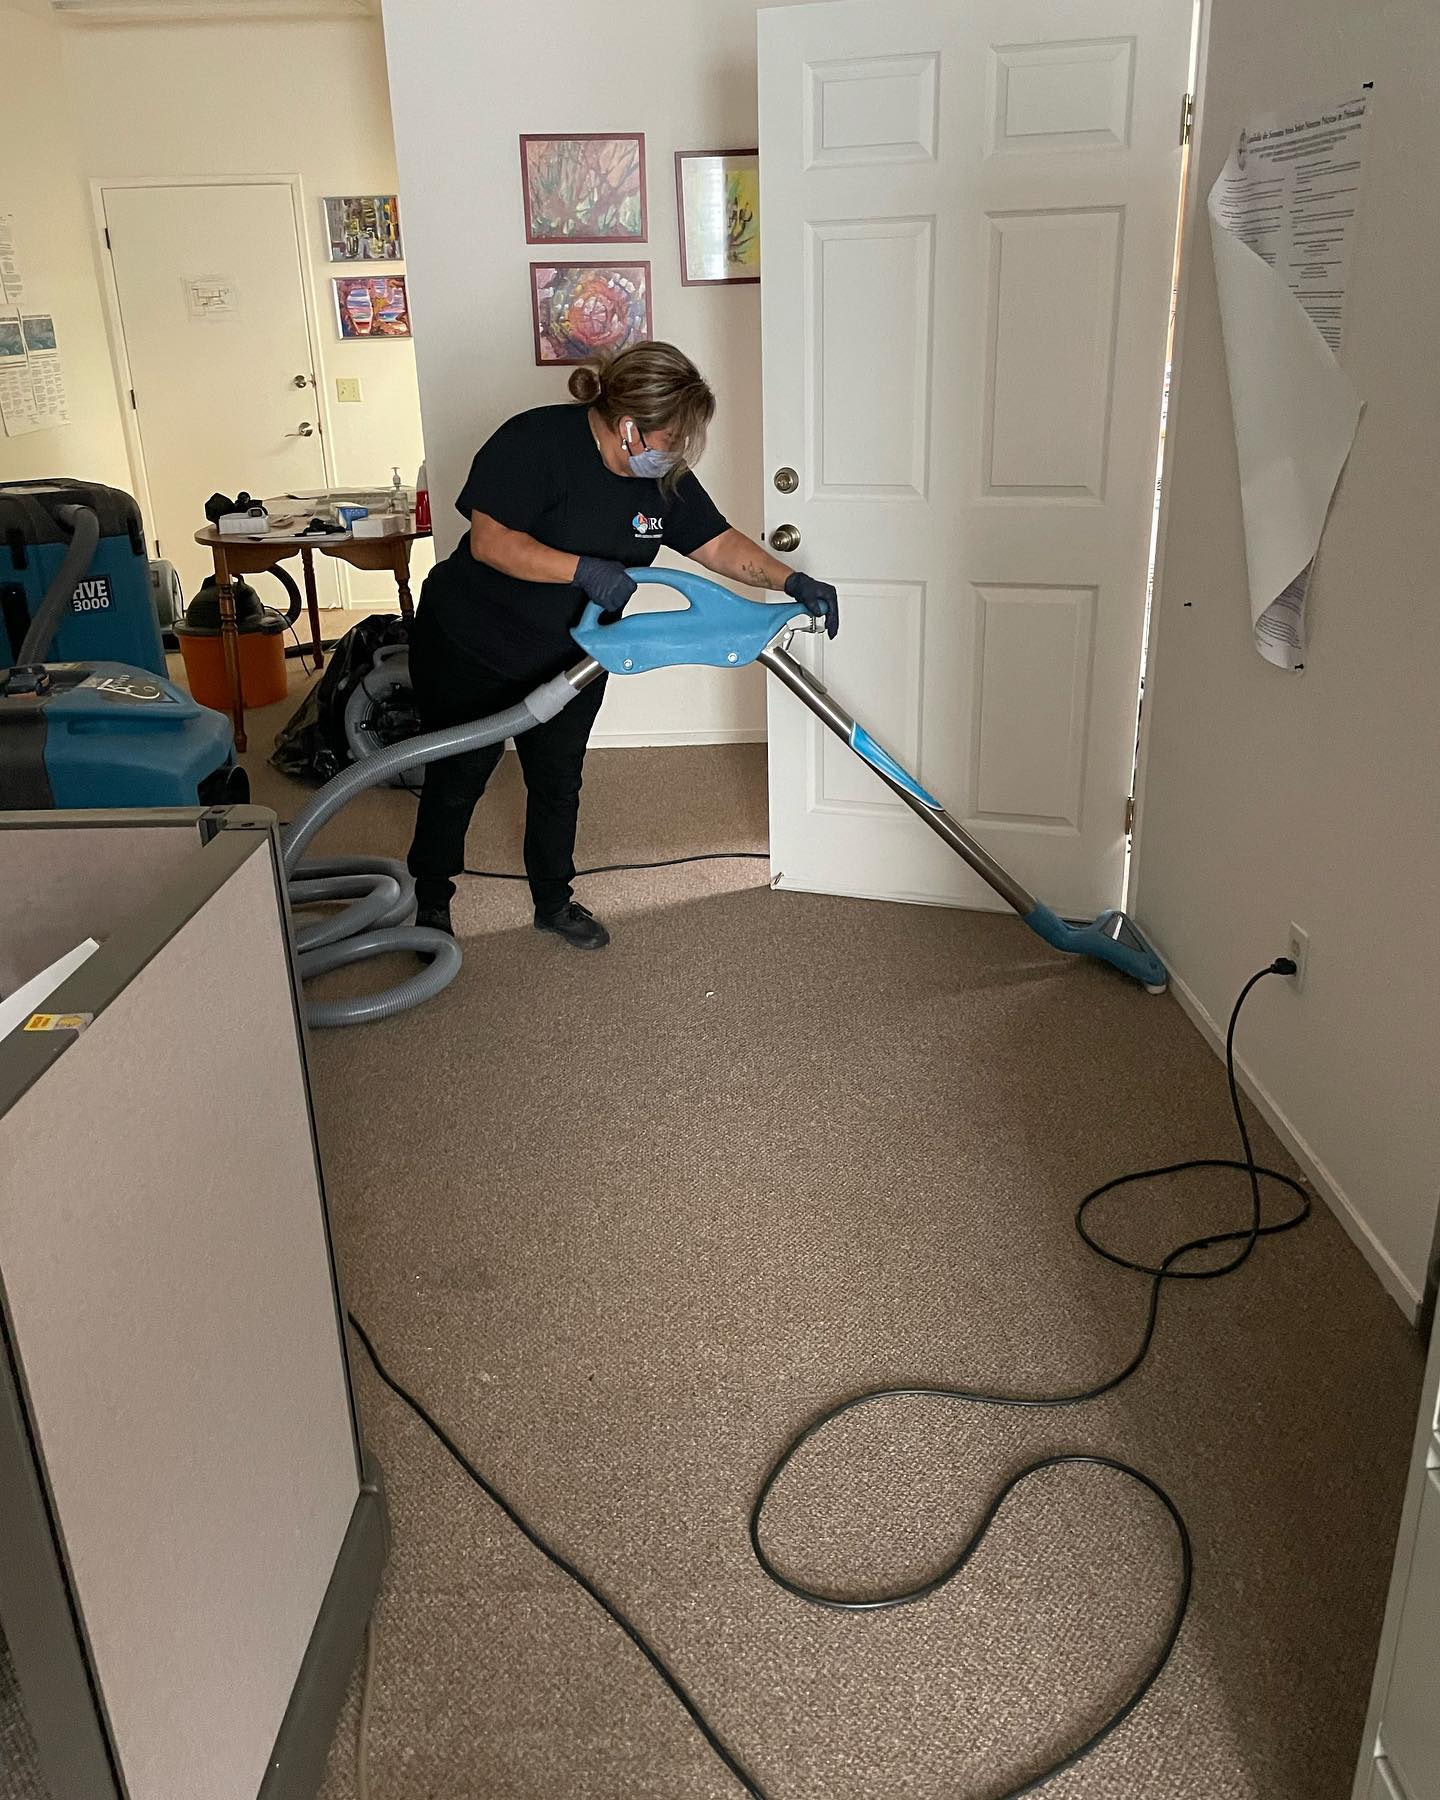 A person uses a steam cleaner to clean the carpet in a room with an open door, framed artwork on the wall, and cleaning equipment visible in the background, part of a thorough mold restoration process.